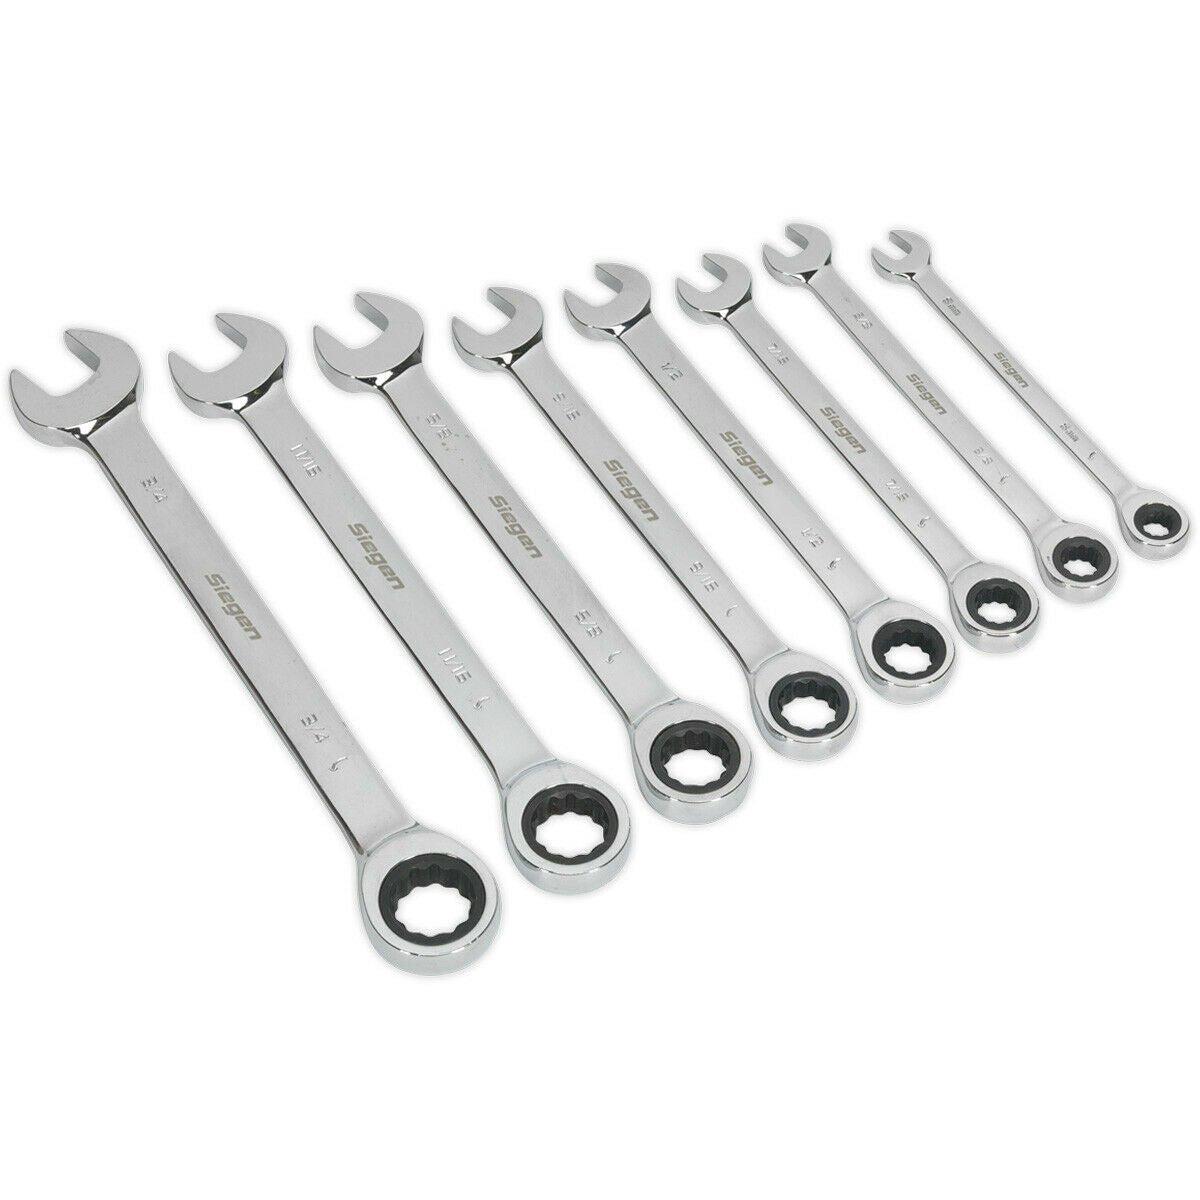 8pc Slim Handled Combination Spanner Set - 12 Point Imperial Ring Open End Head